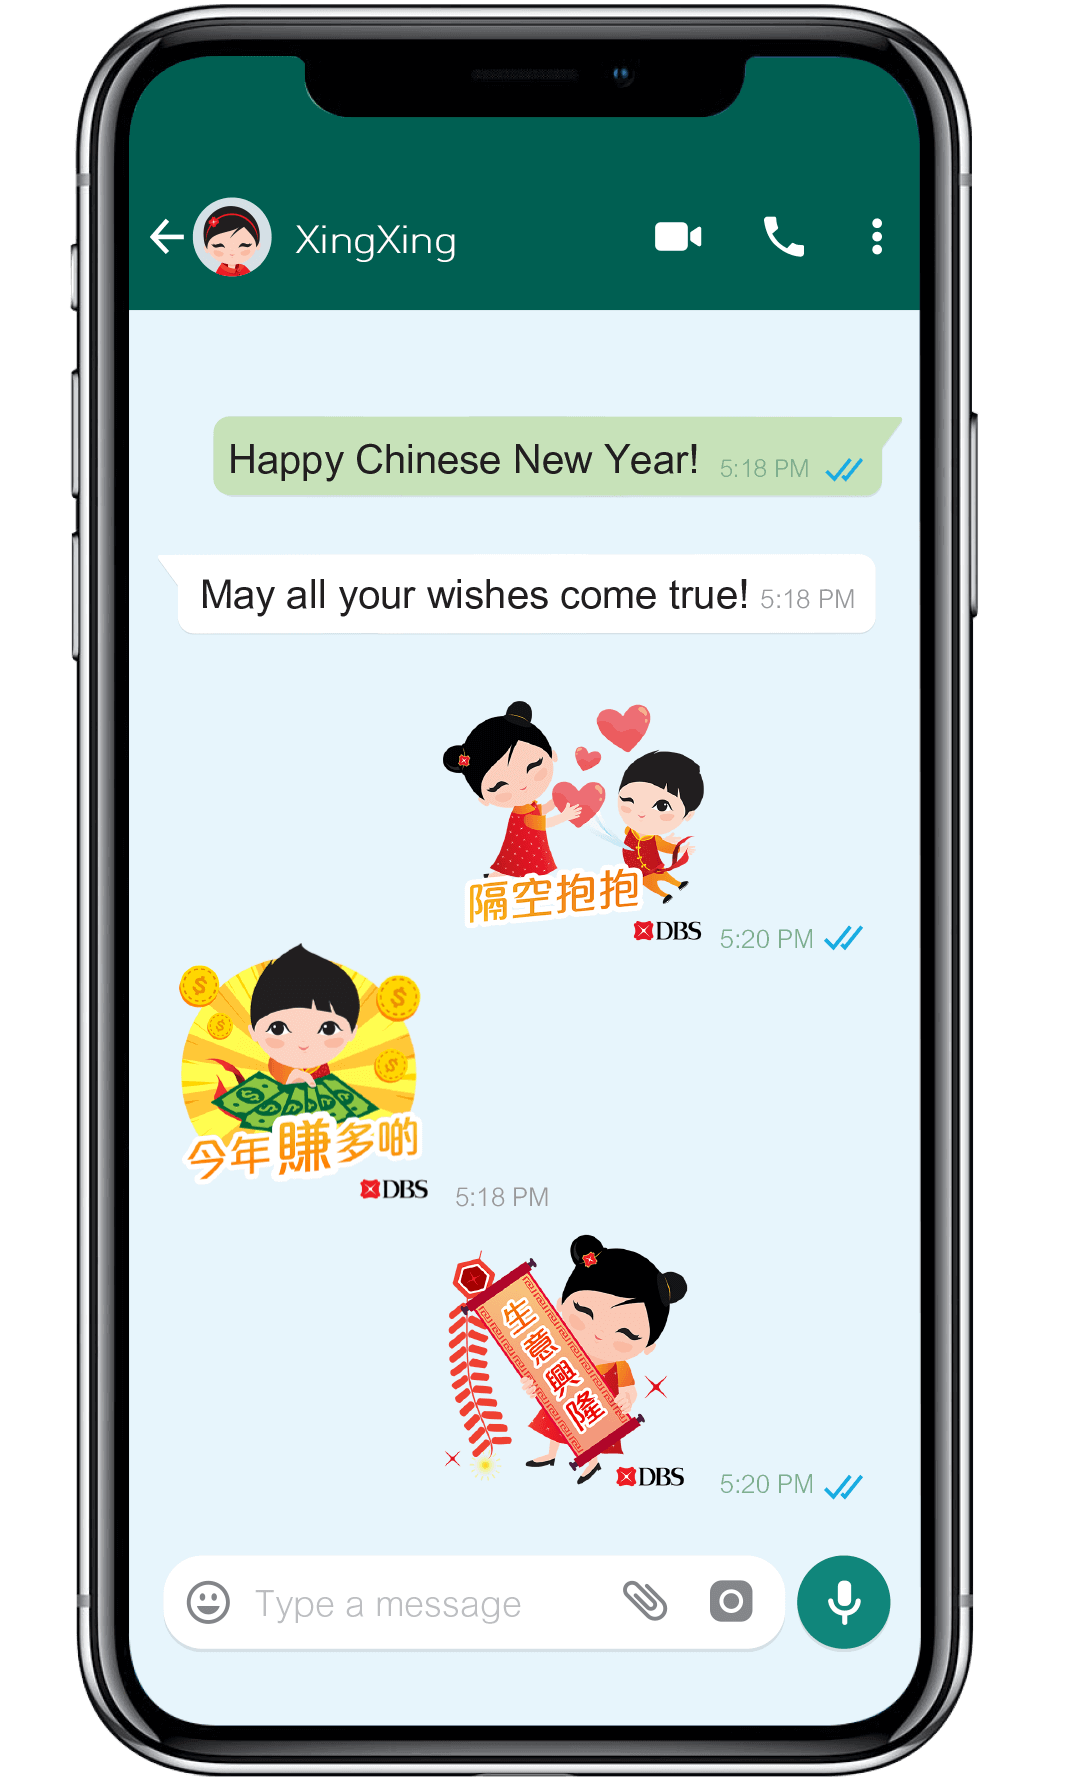 Don’t forget to include one of our lovely tailormade CNY WhatsApp stickers in your messages!